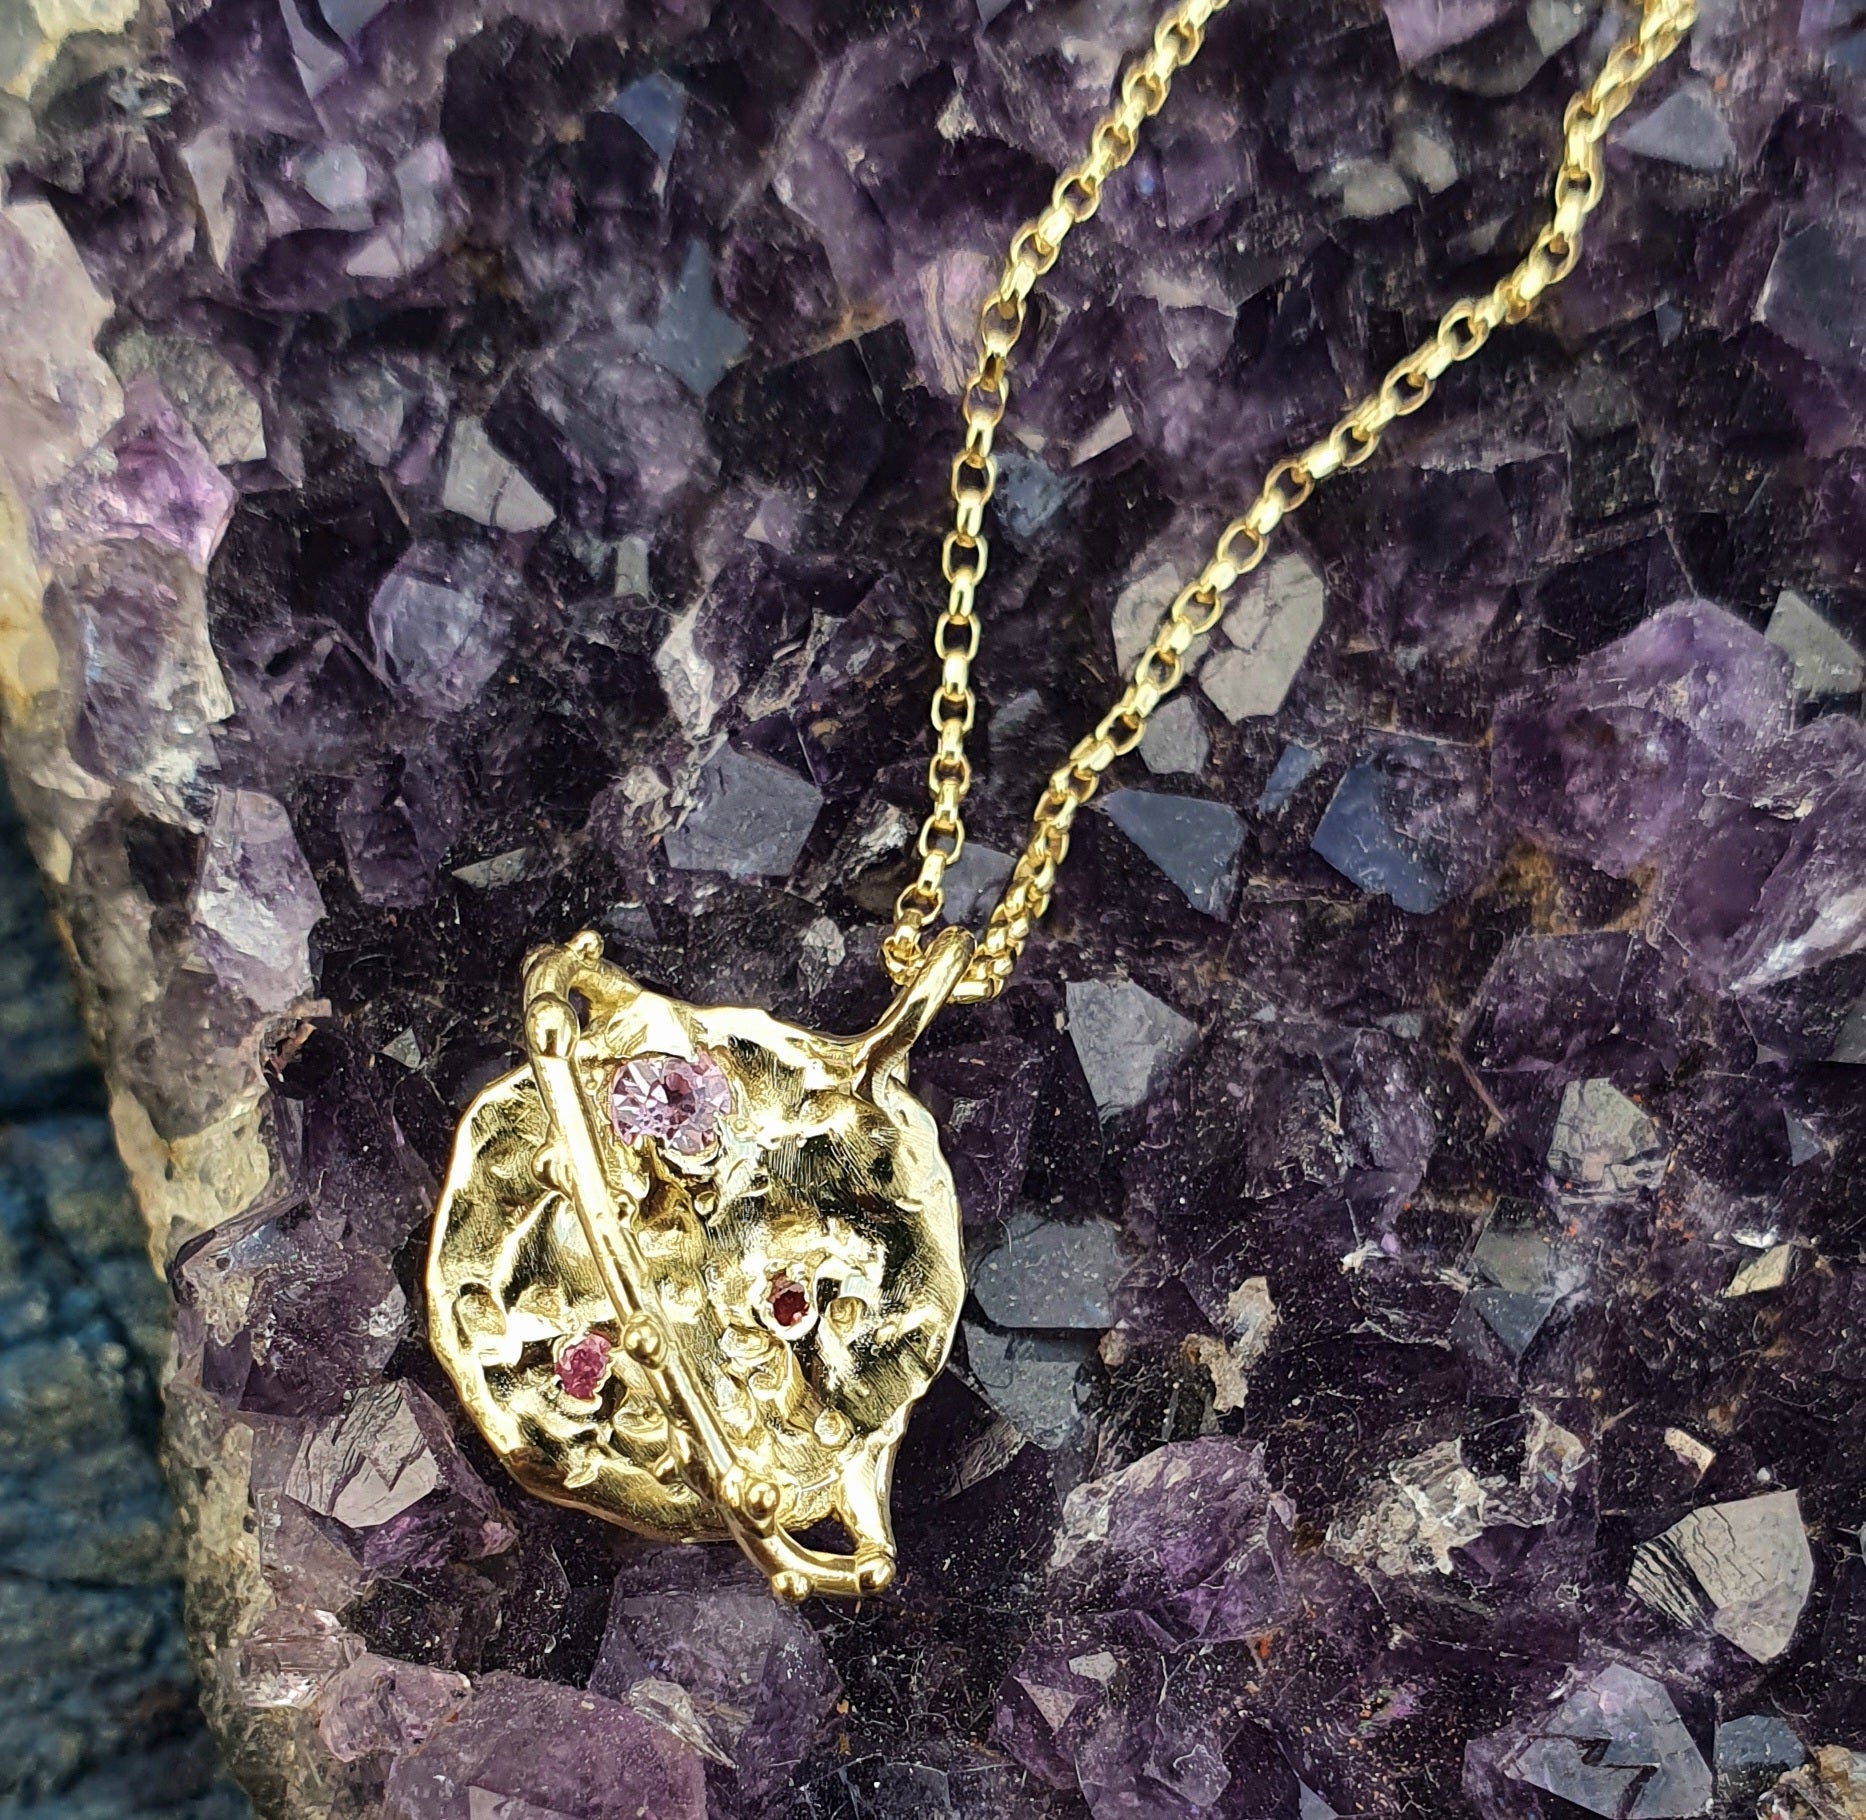 Planet Pink - 9k gold and pink sapphire pendant necklace